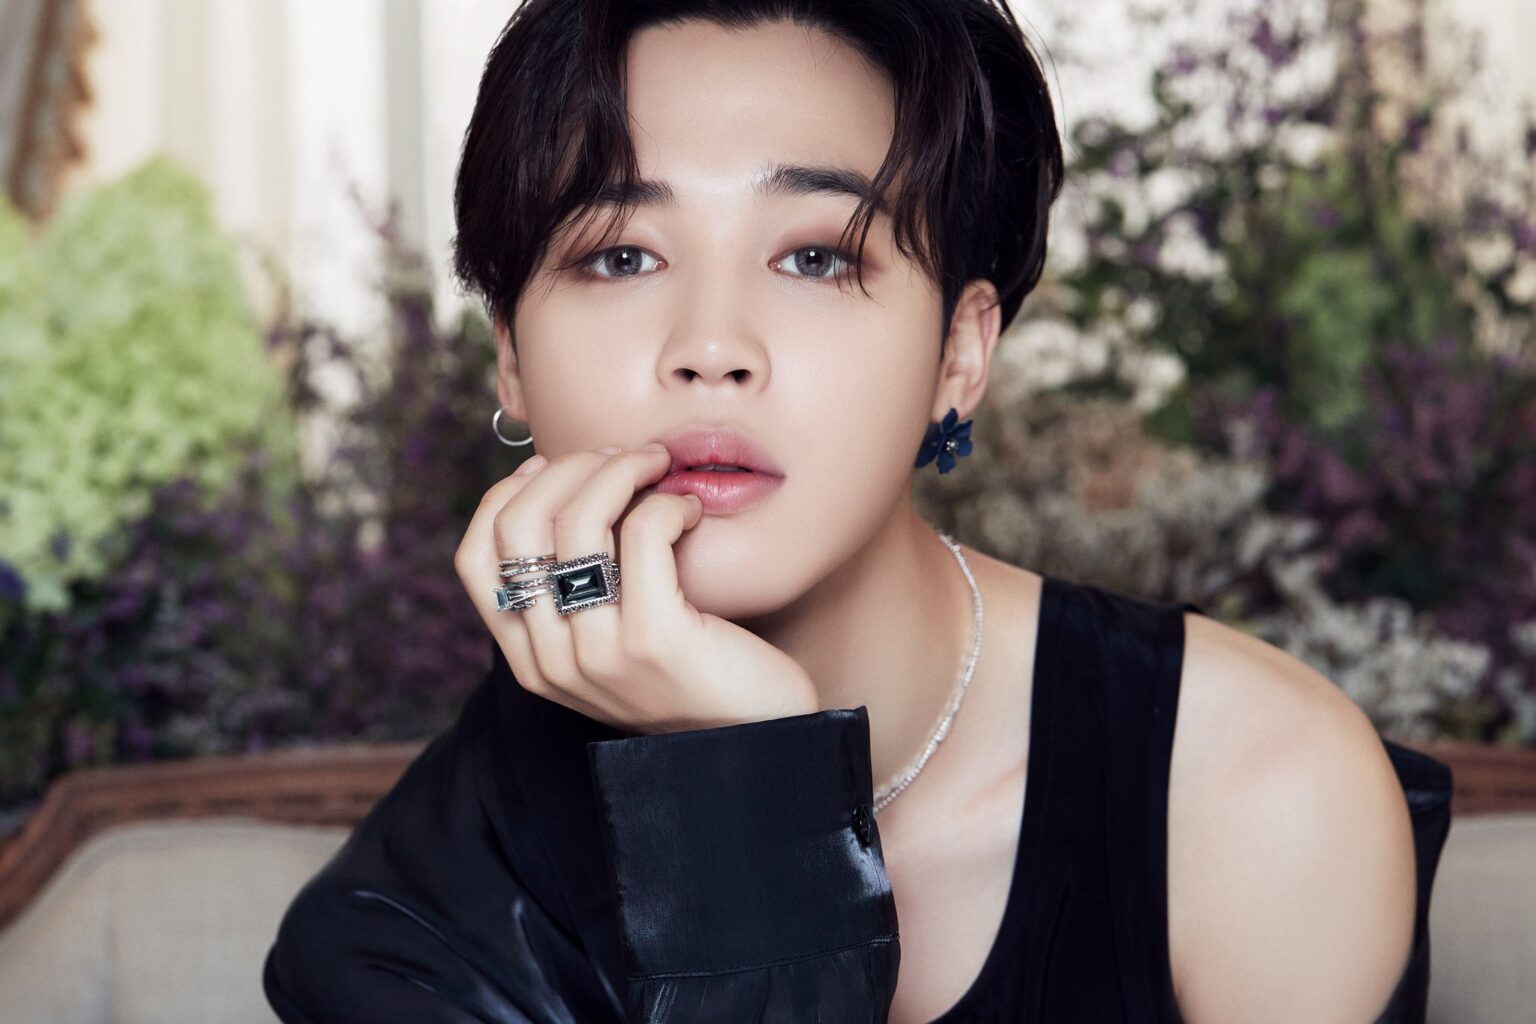 BTS has certainly built up a gleaming reputation for themselves all around the world. Will we hear more solo music from Jimin?